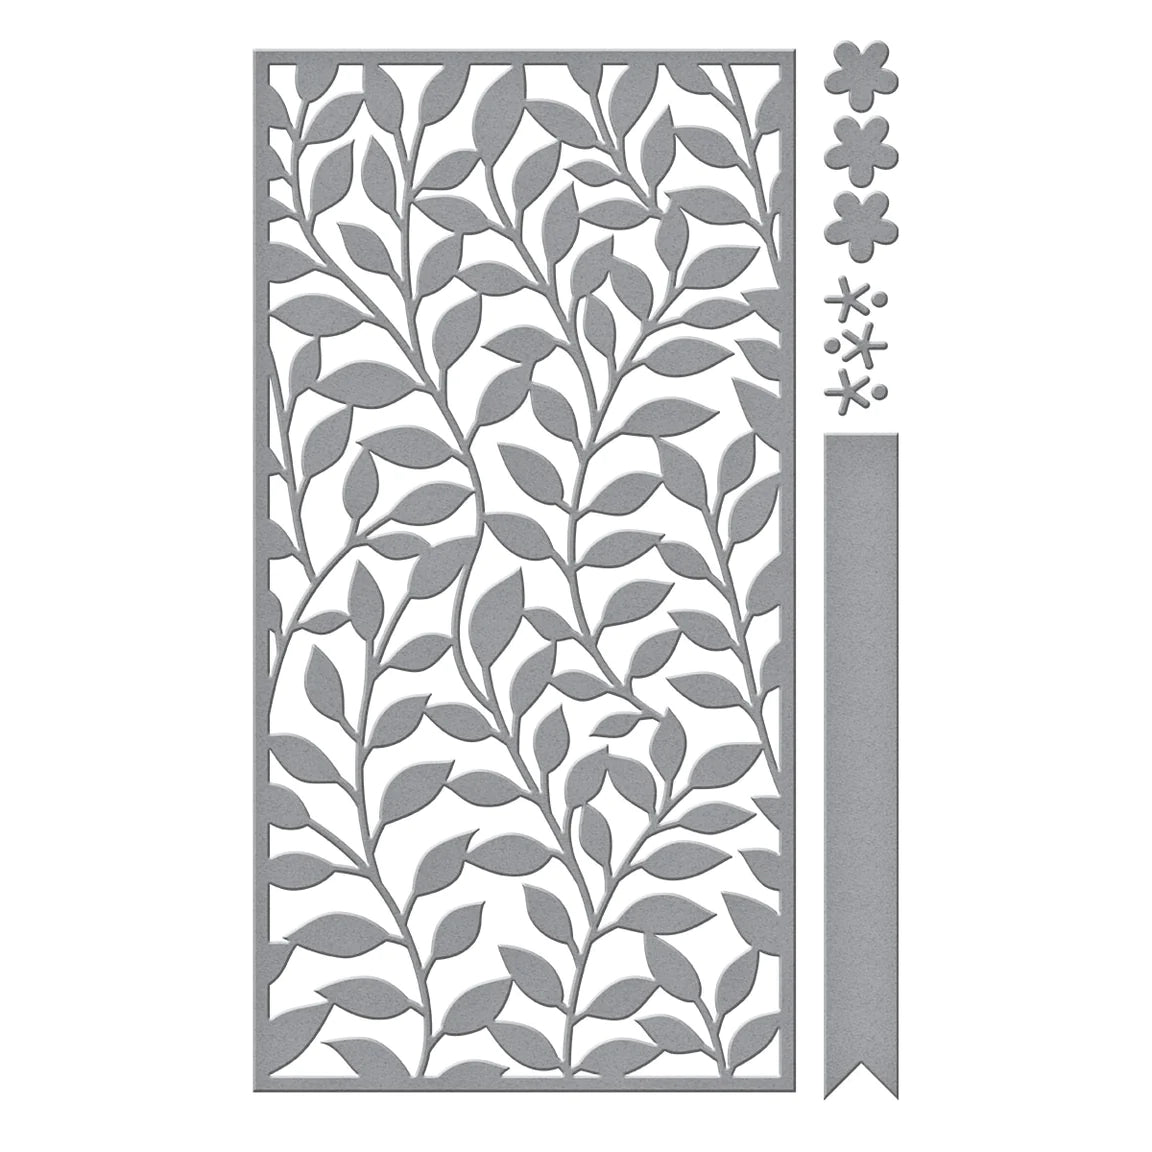 Spellbinders Sweet Leaf Mini Slimline Etched Dies from the Layered Fleur Bouquet Slimlines Collection - S5-508